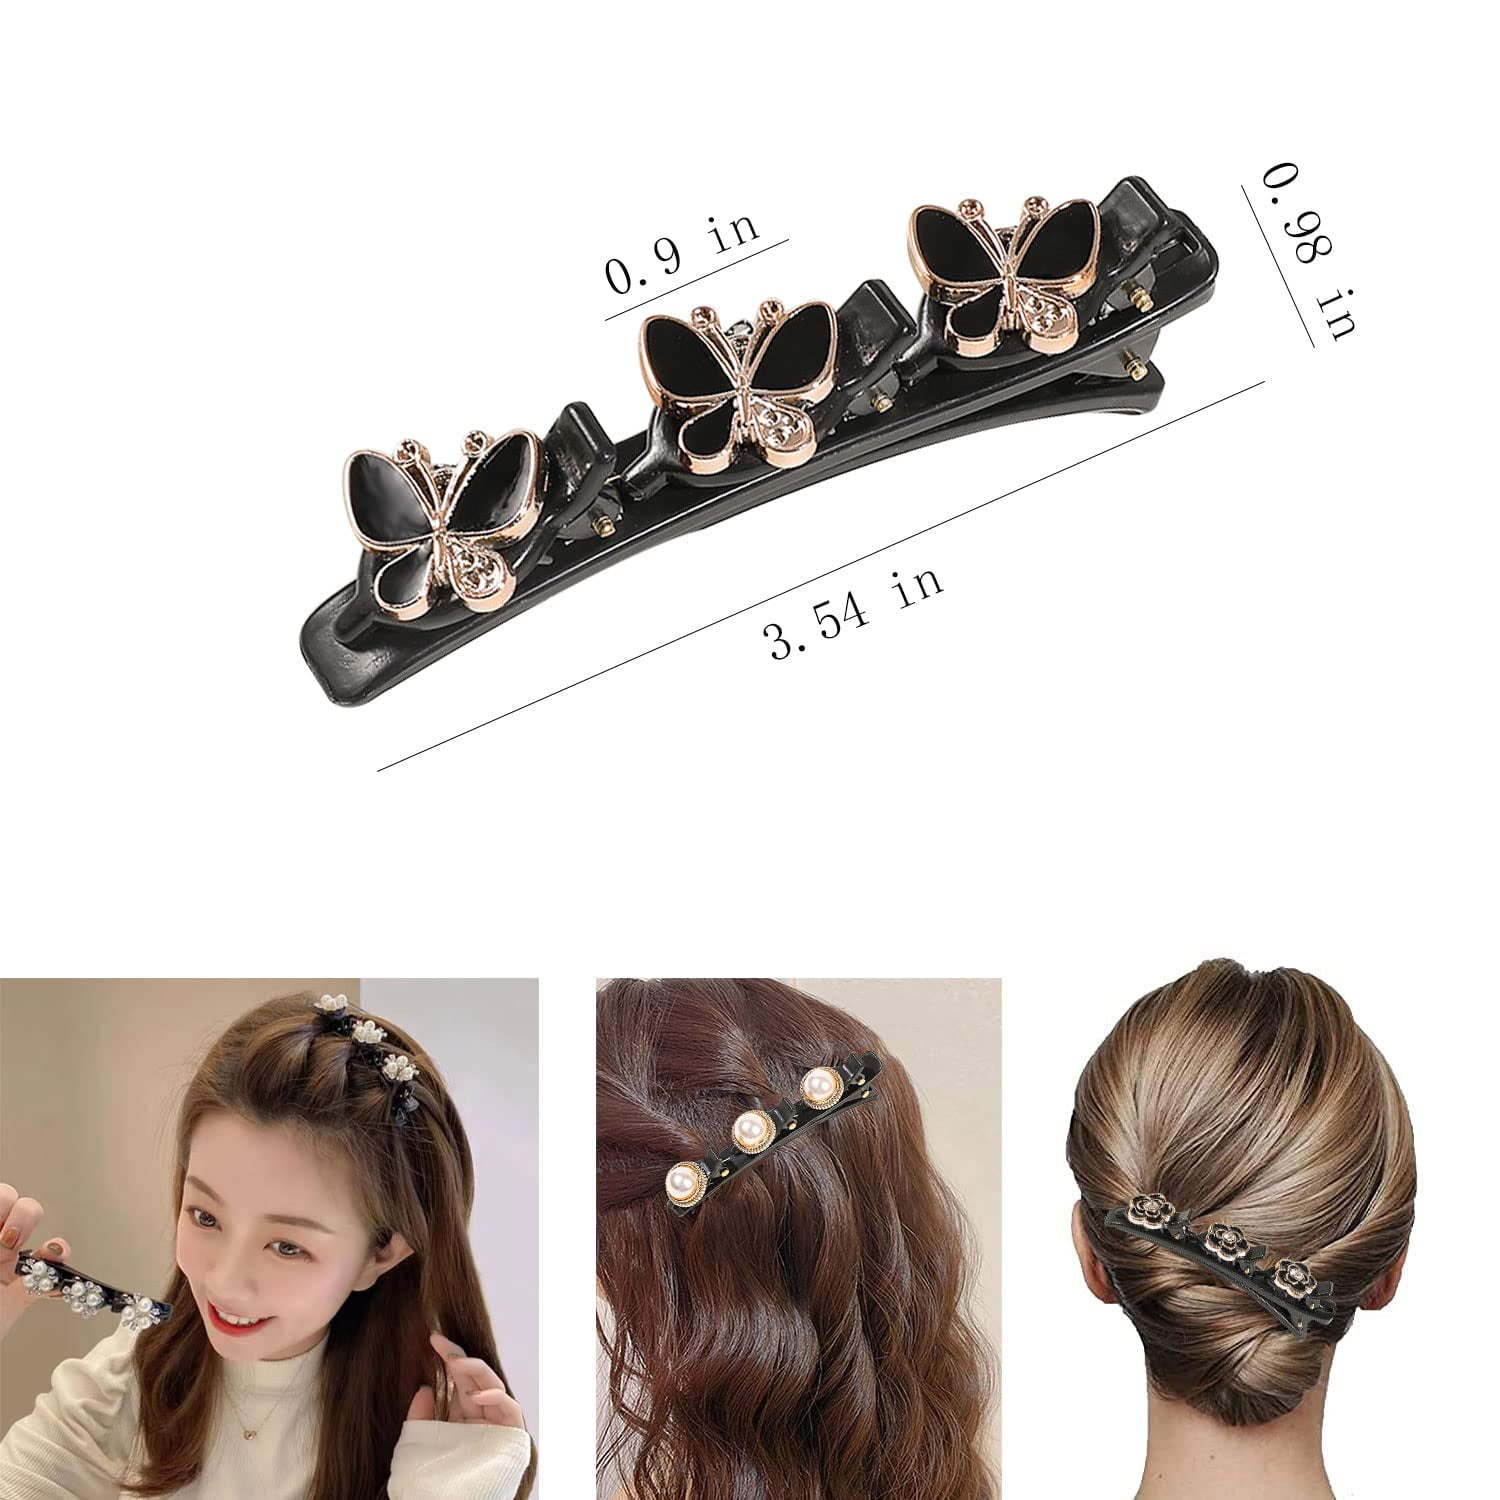 Braided Hair Clips for Women Girls, 6Pcs Satin Fabric Hair Bands with 3  Small Clips, Triple Braided Hair Clip, Rsvelte Hair Clips with Pearl for